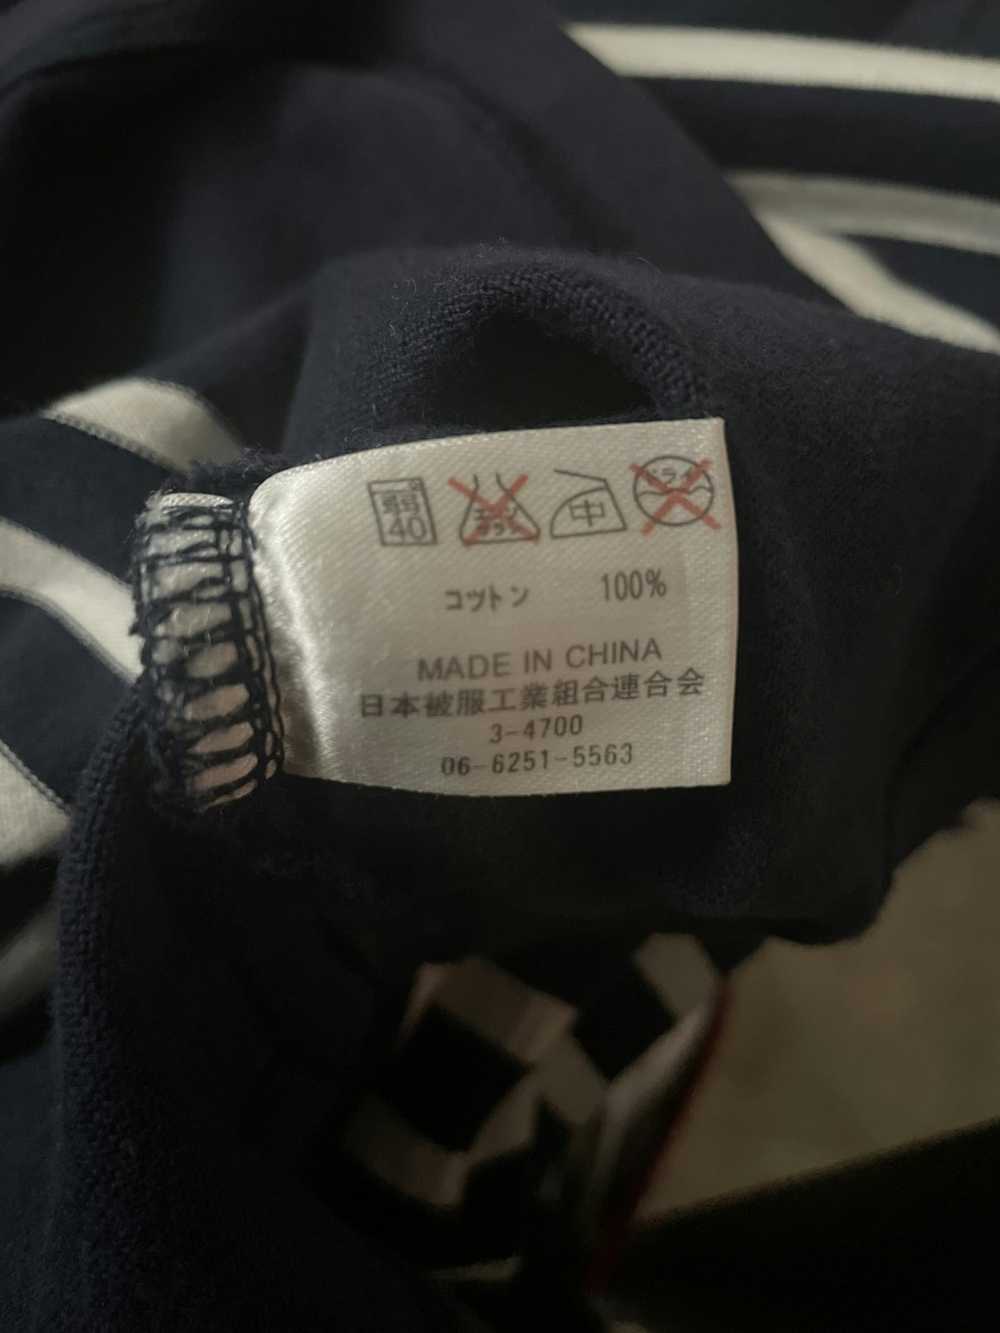 Undercover Undercover MAD longsleeve - image 4